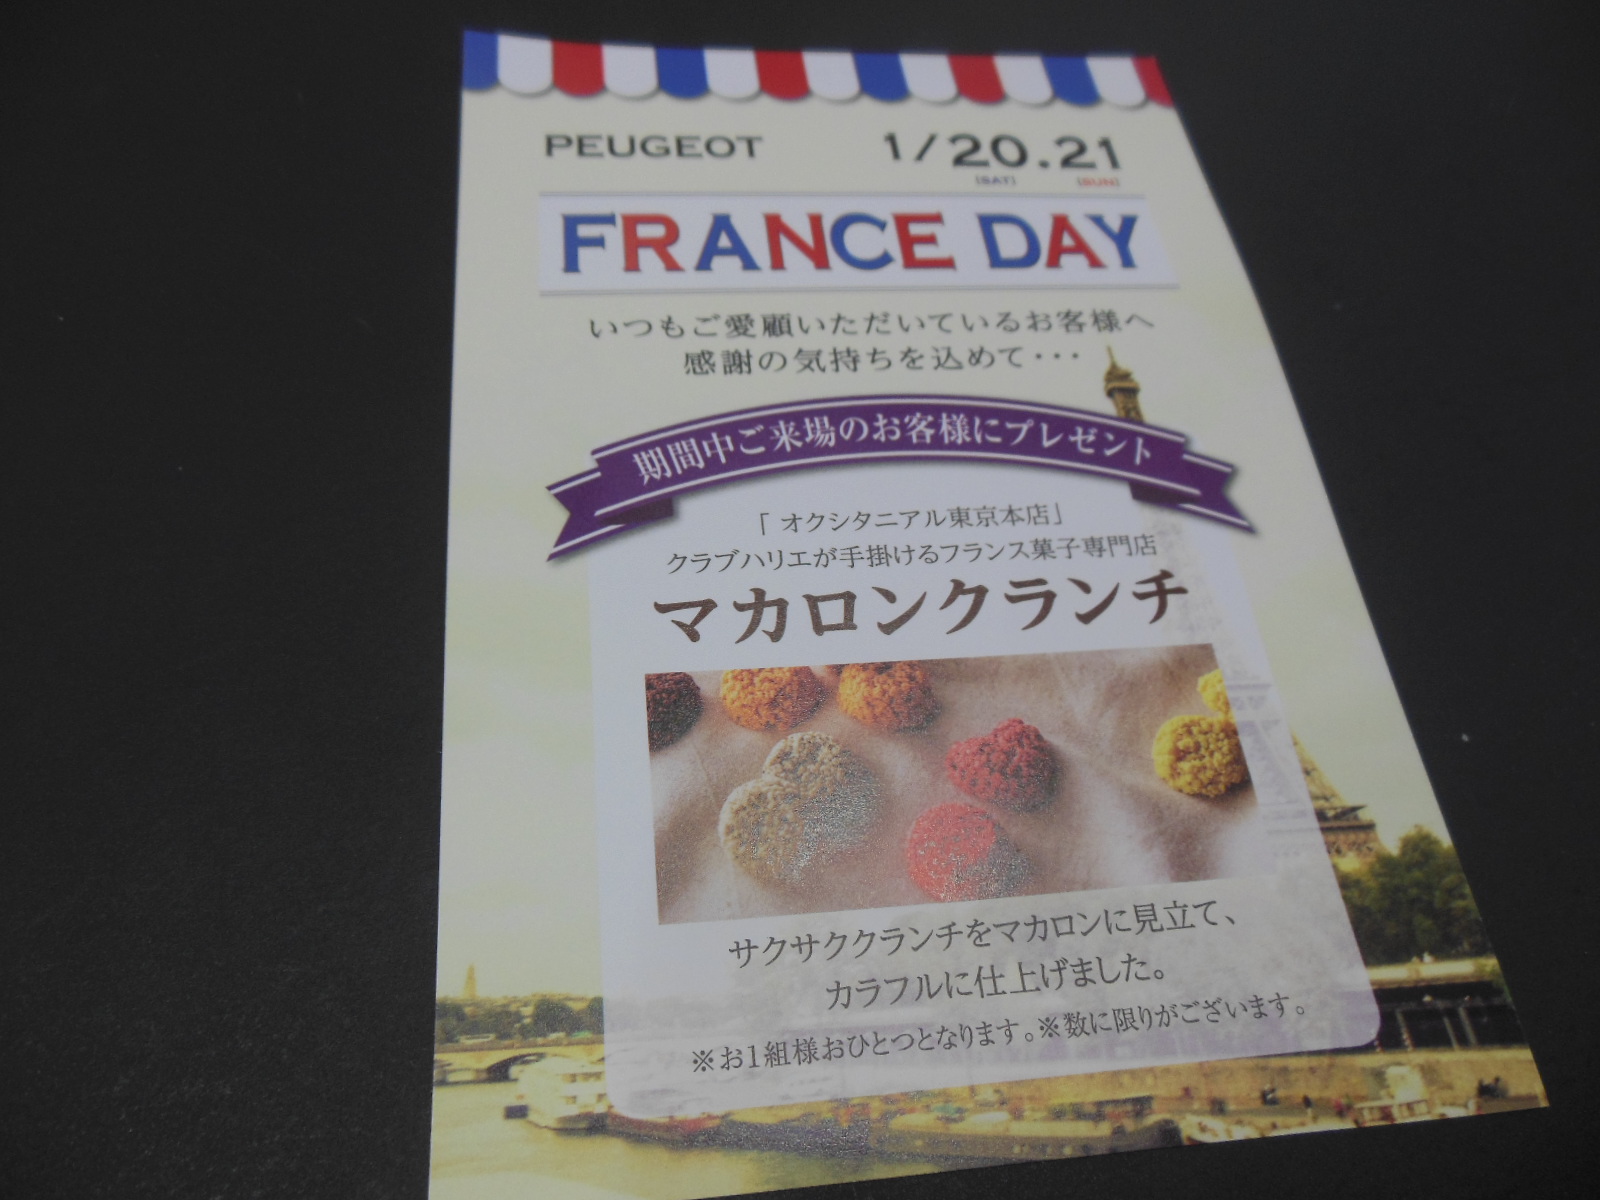 FRANCE DAY　2018/1/20~2018/1/21